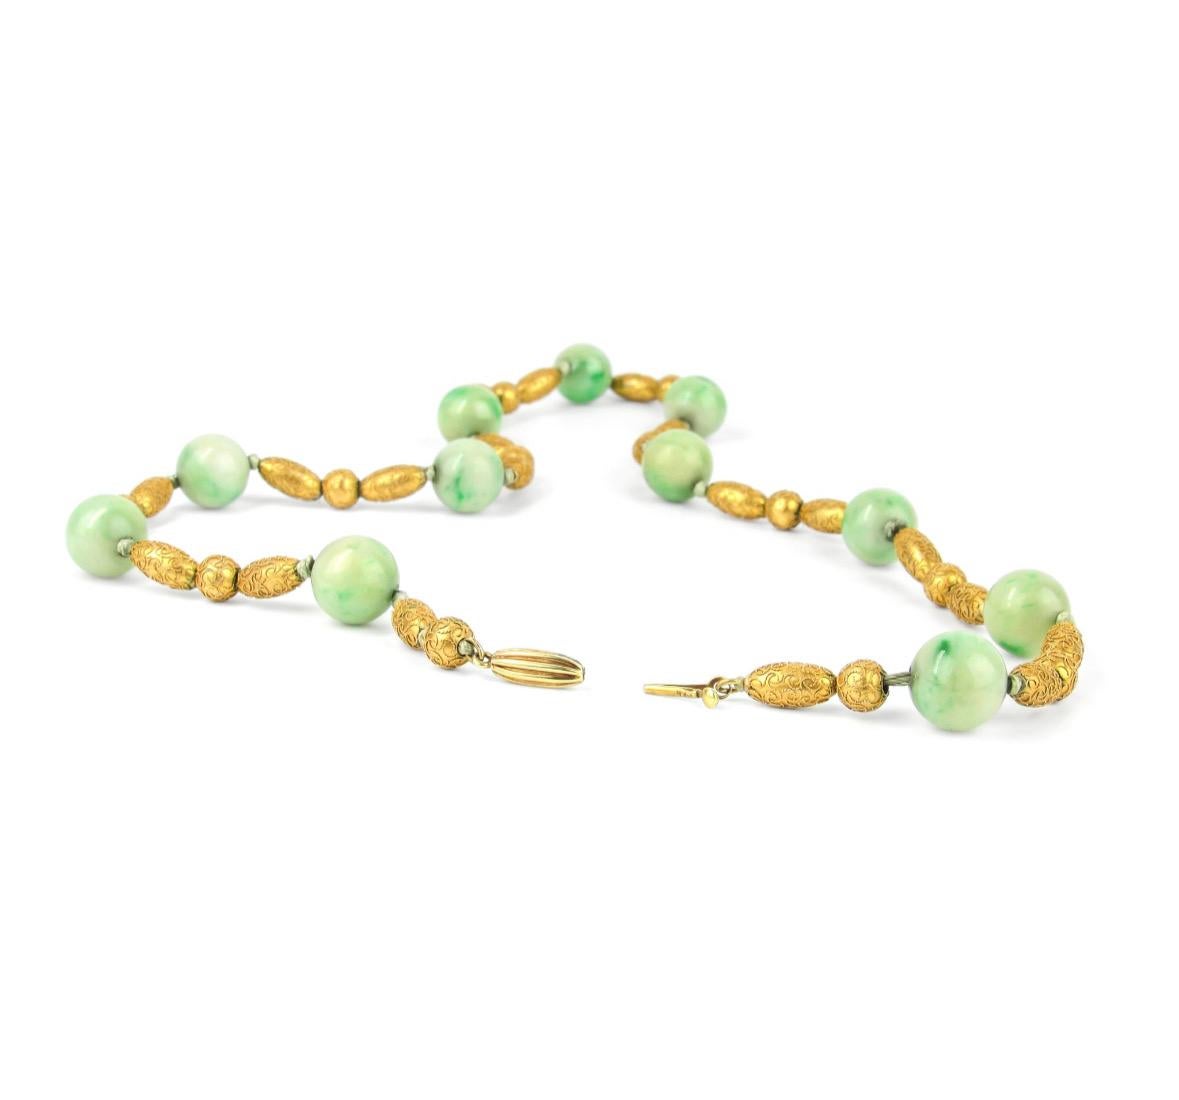 Measuring 15 7/8” long, this lovely Etruscan Revival necklace features apple green and white jade beads alternating with gold cannetille beads. Masterfully hand-fabricated in 14K yellow gold with a delightful bloomed finish.

 

Jade: 9.5